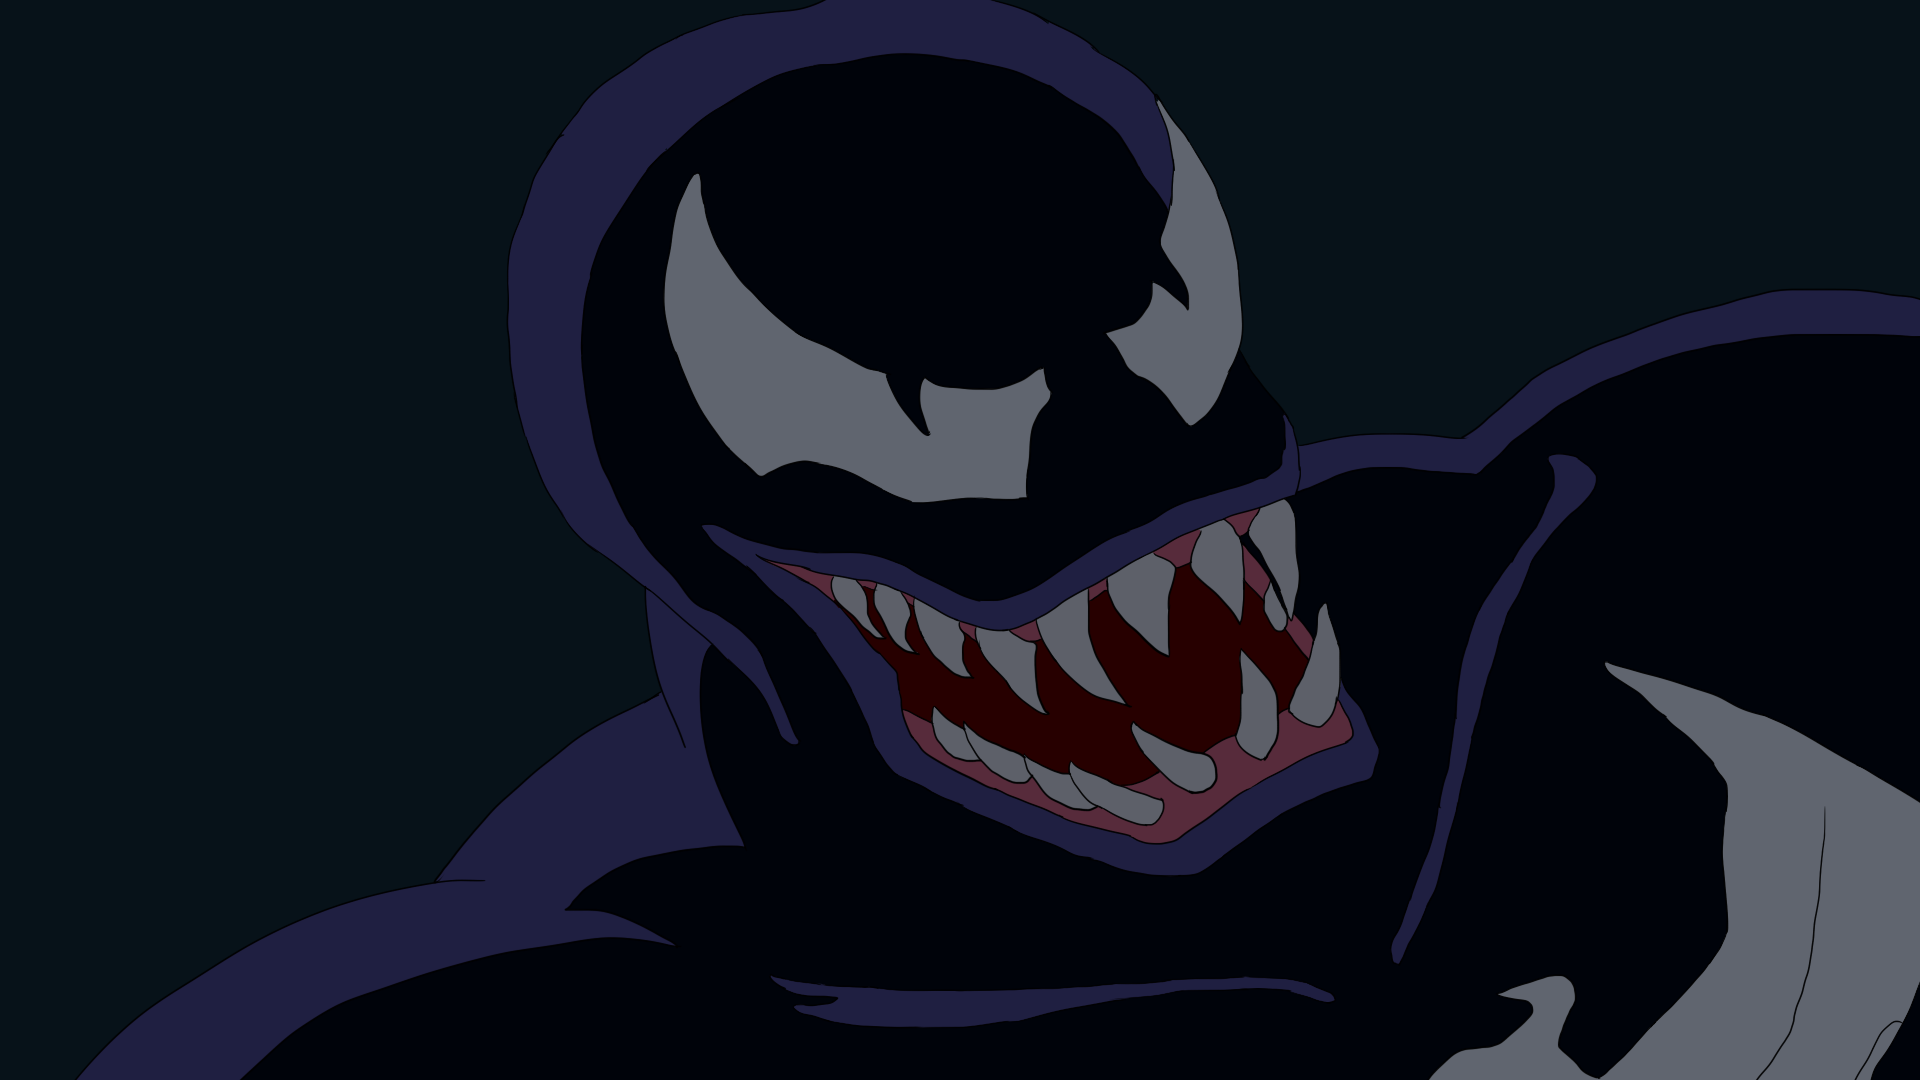 Venom from Spider-man: The Animated Series.

Traced and colored in Paint Tool SAI.
